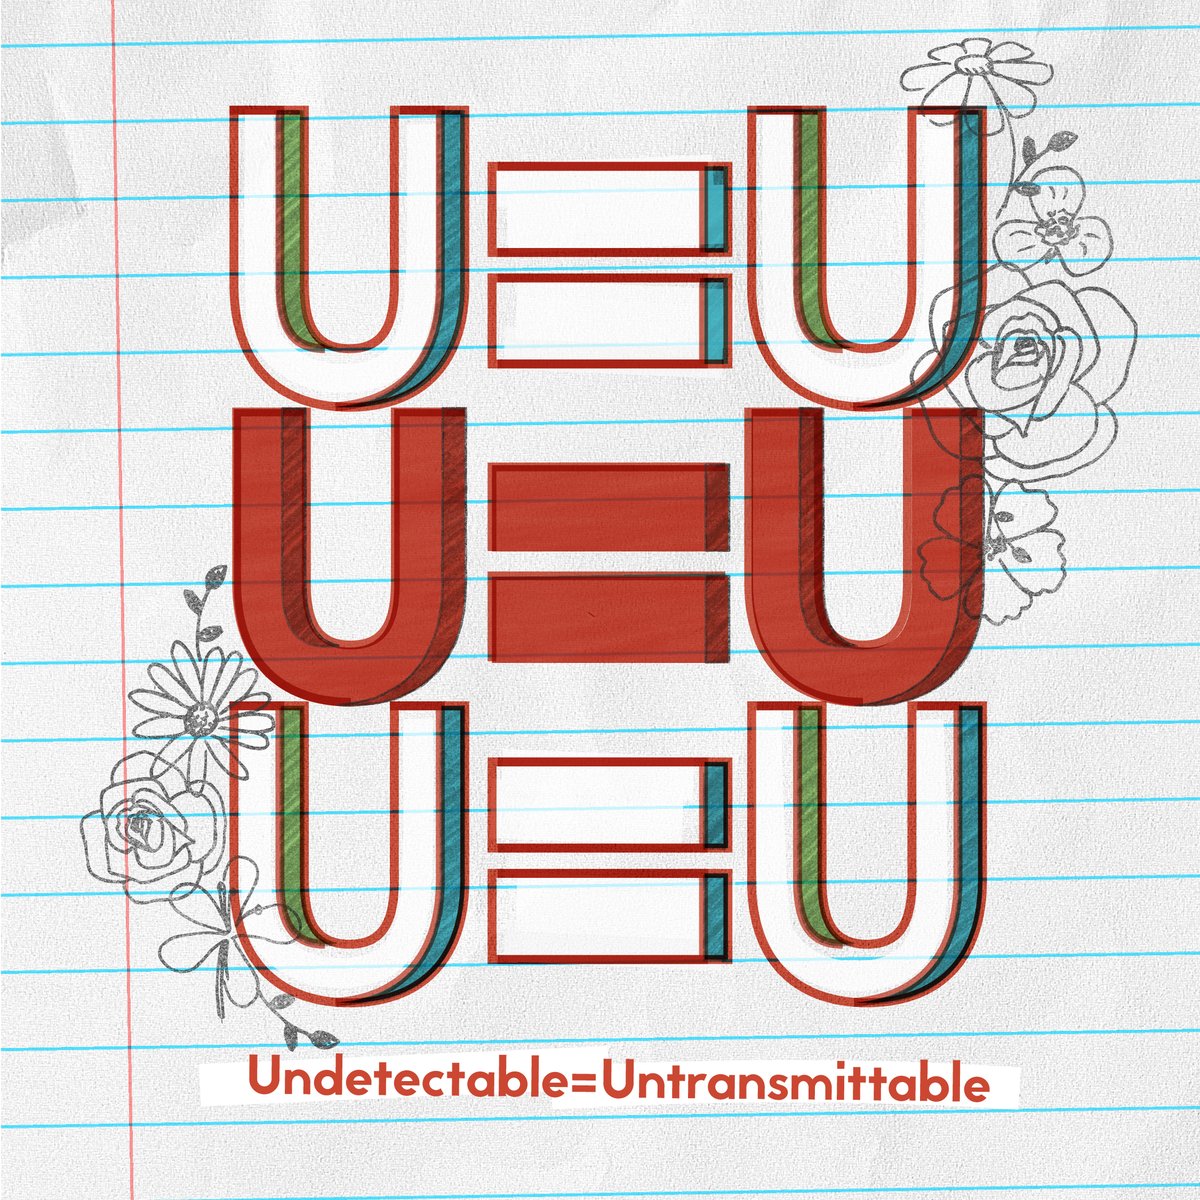 To help people with HIV live their best lives, we must end #HIV stigma and discrimination. This starts with sharing facts.

#UequalsU. People with HIV who are undetectable can stay healthy and WILL NOT transmit HIV to their partners.

#StopHIVTogether